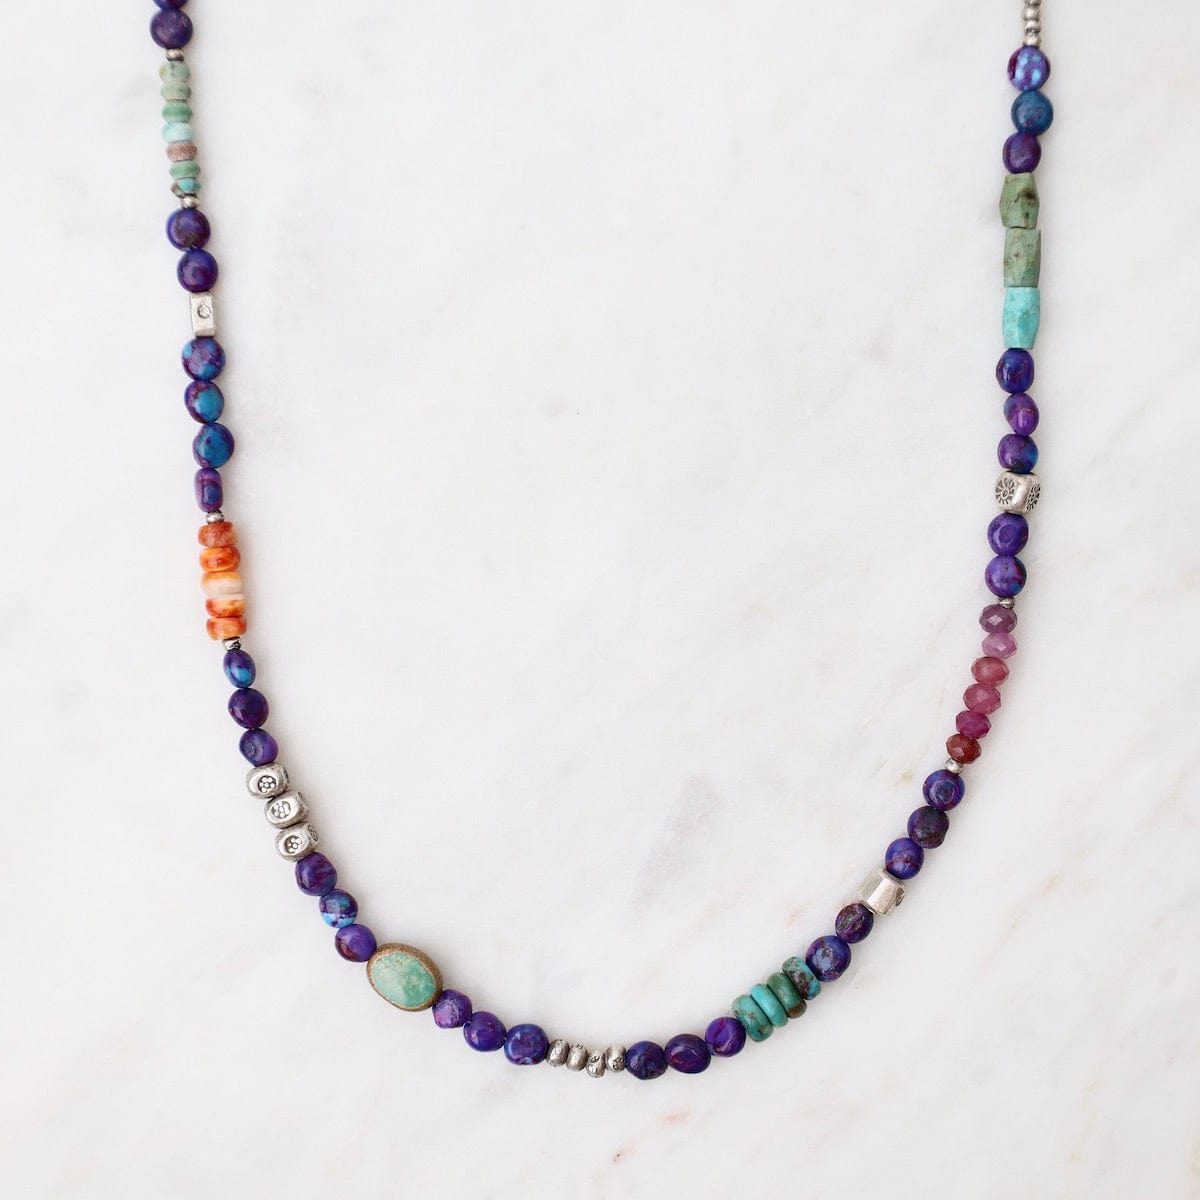 NKL Purple Turquoise & Silver Necklace